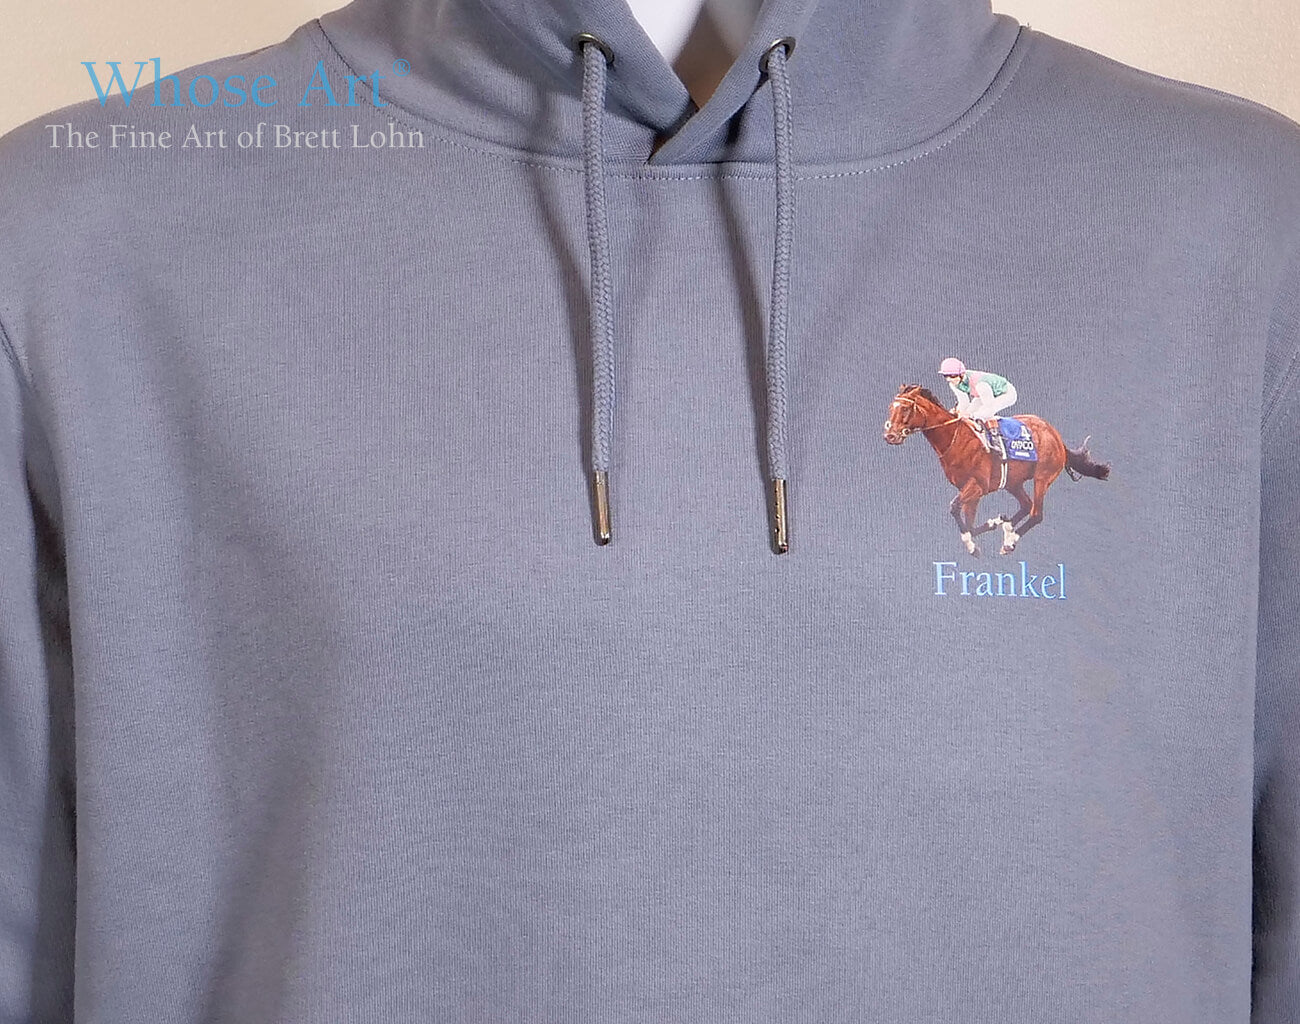 Frankel Horse memorabilia hoodie sweatshirt. Features a painting of Frankel galloping, with Tom Queally on board, printed on the front.